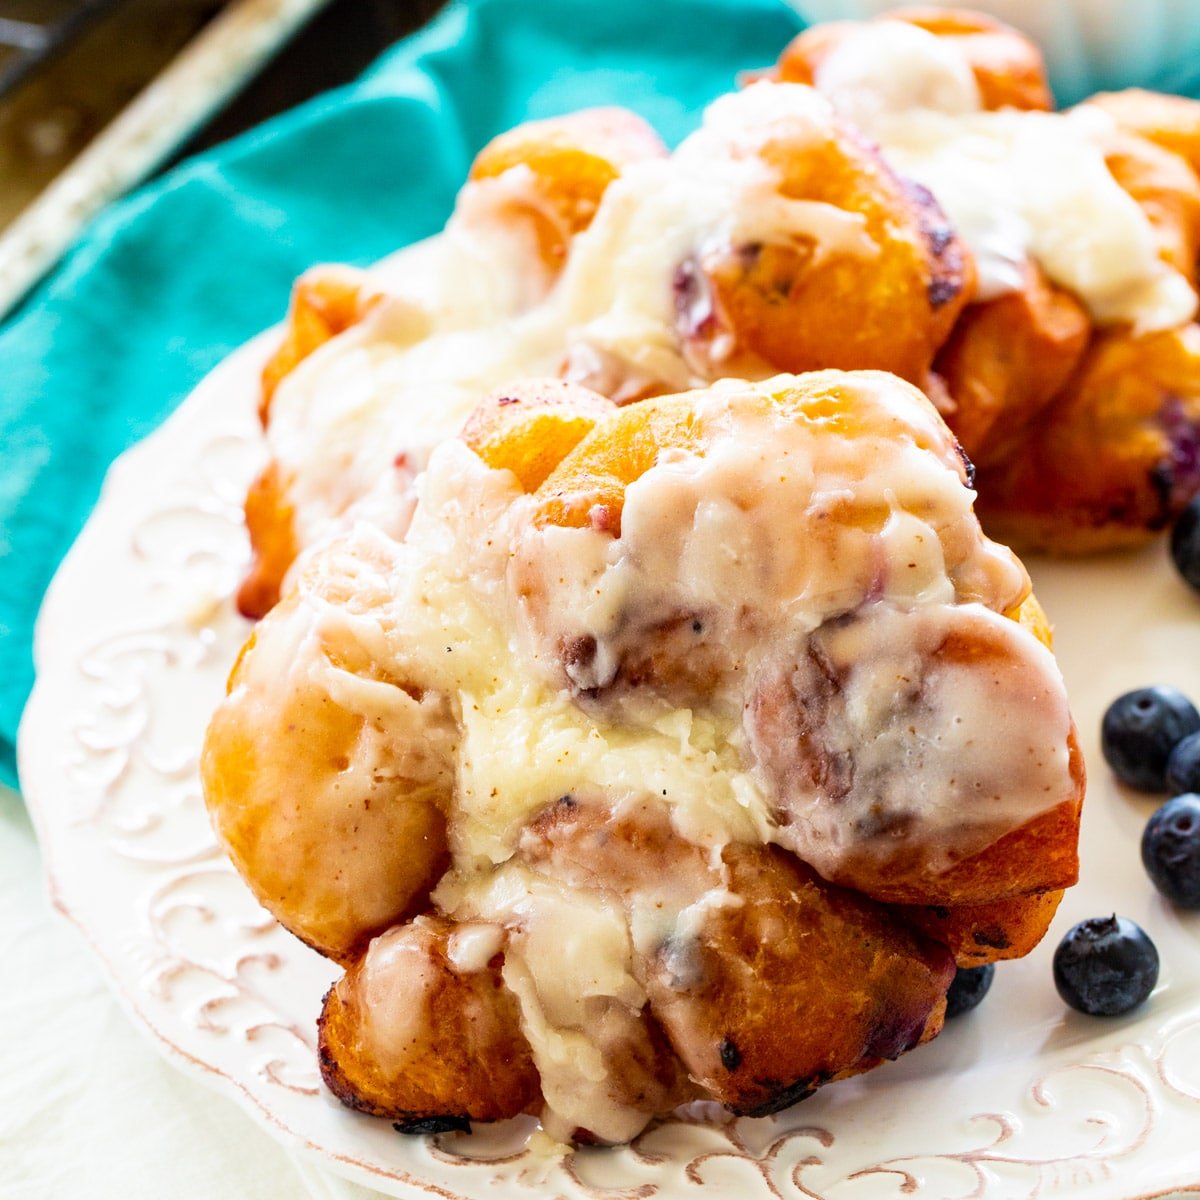 Blueberry Fritters on a plate.